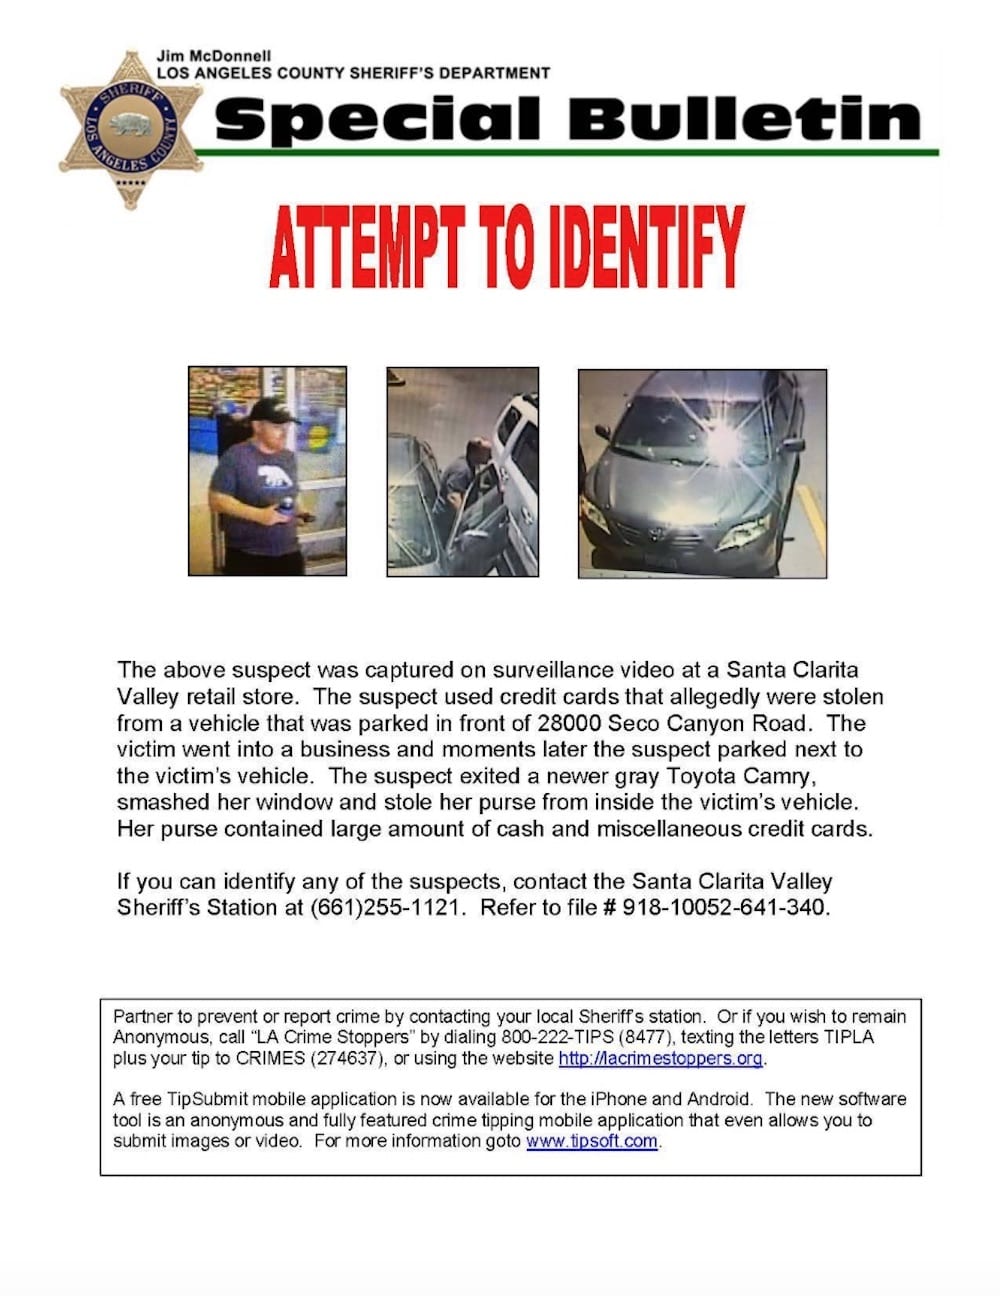 Detectives Asking For Help In Identifying Suspected